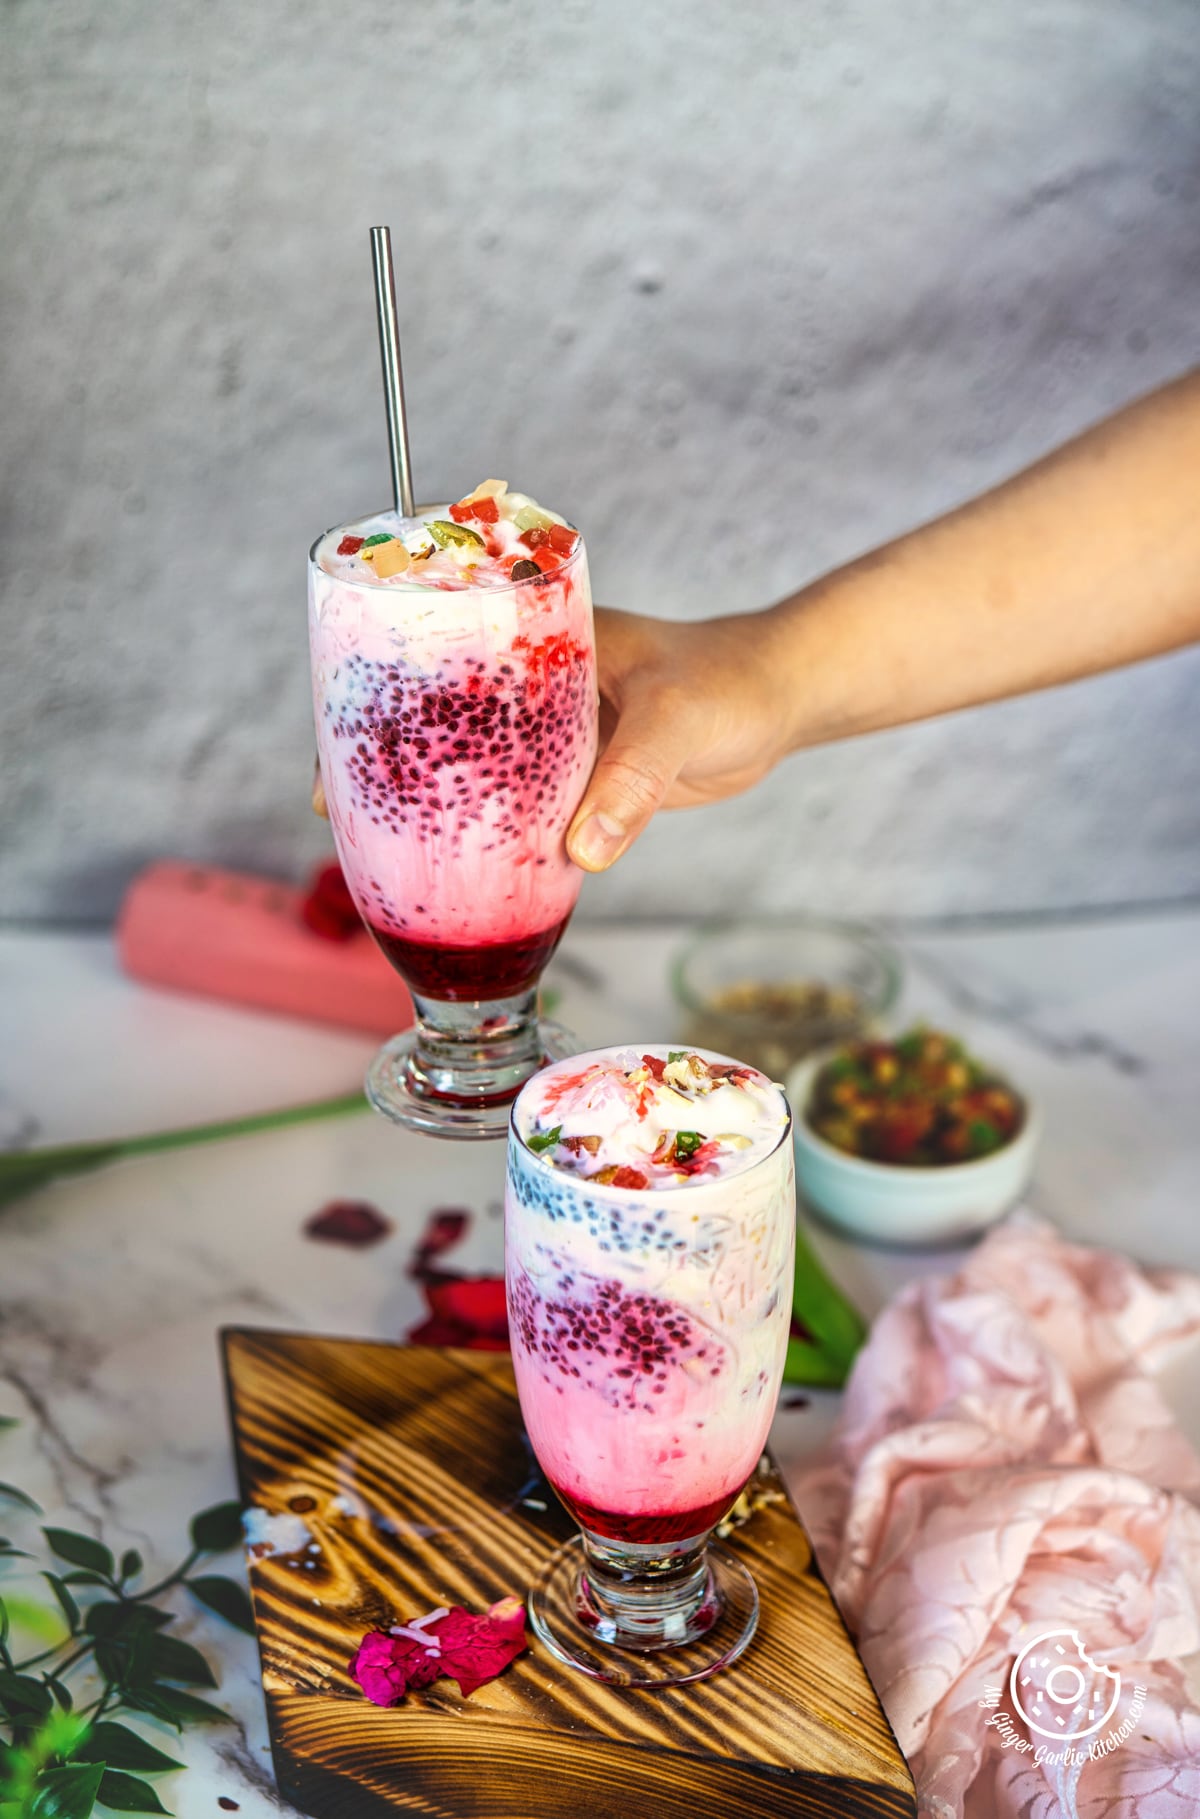 photo of a person holding a glass of fruity pink falooda dessert drink